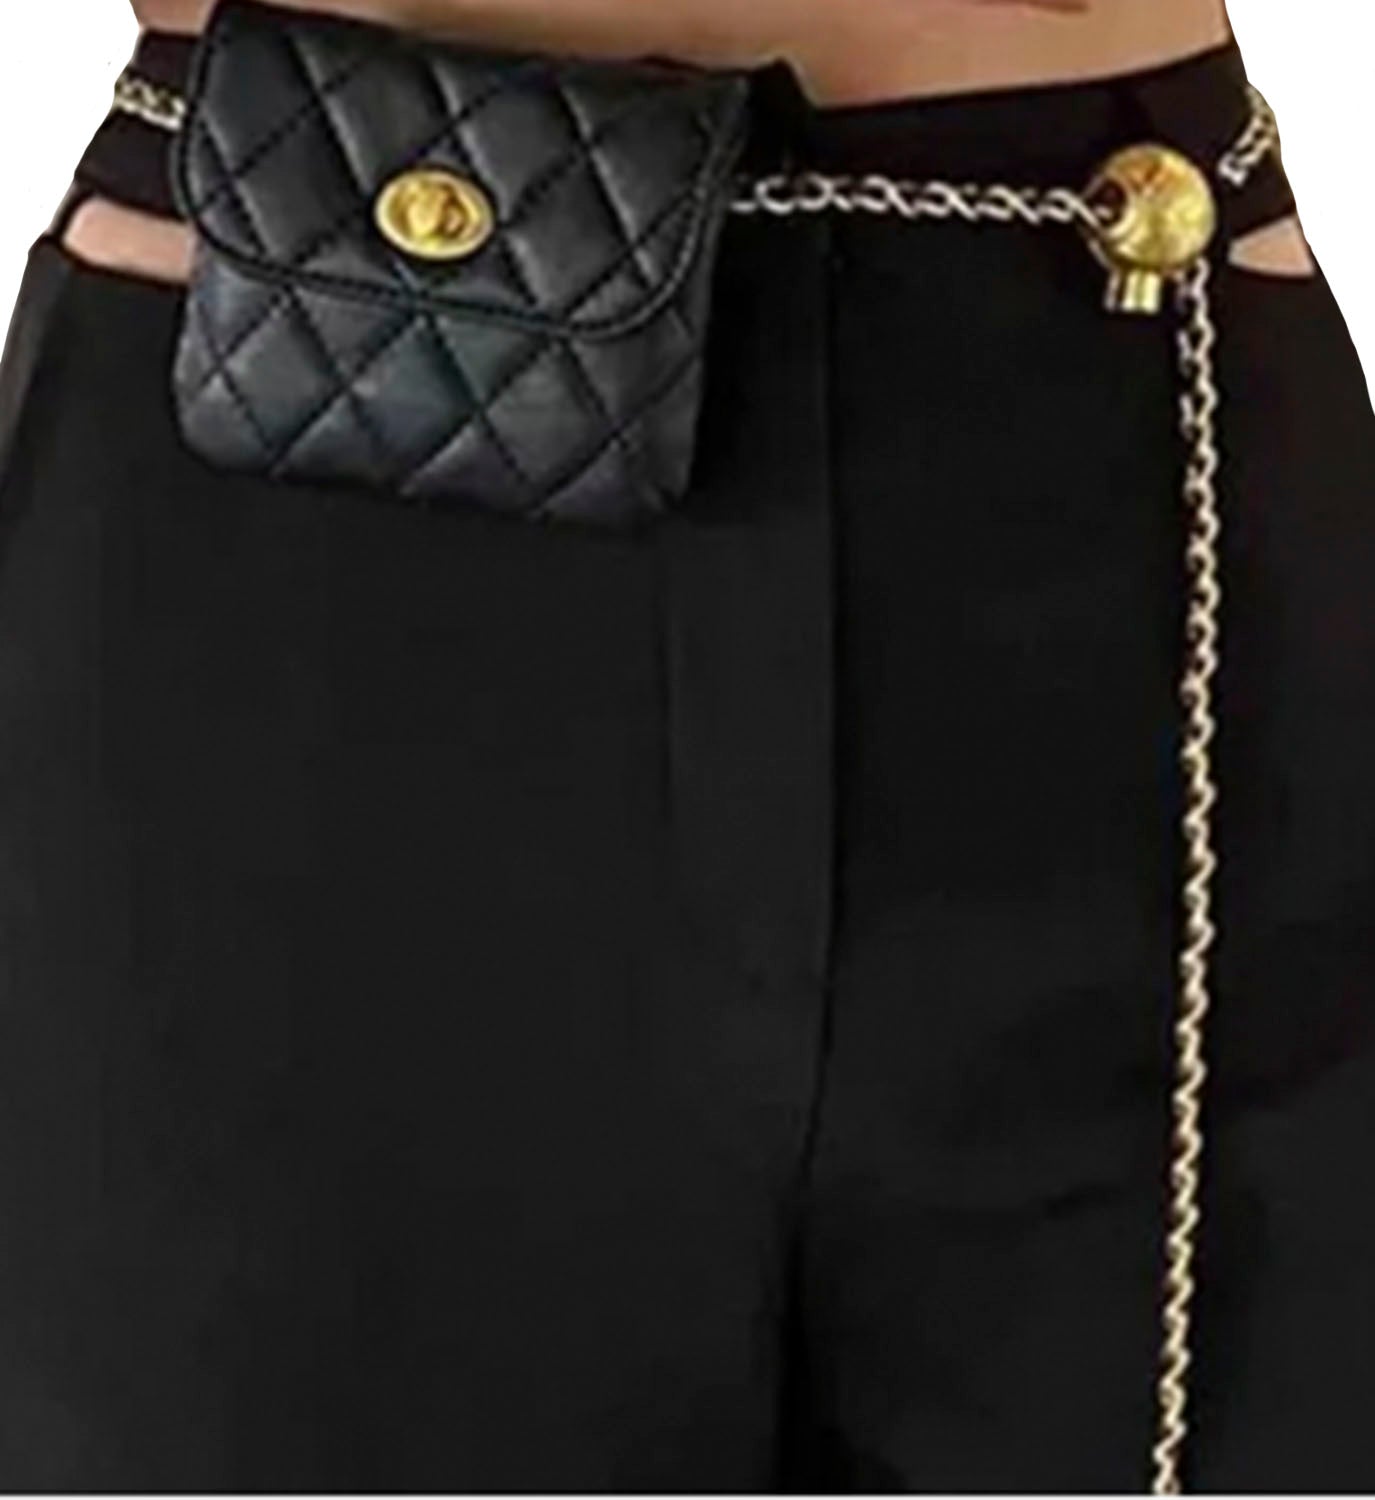 Quilted Leather Chain Pouch - DIGS